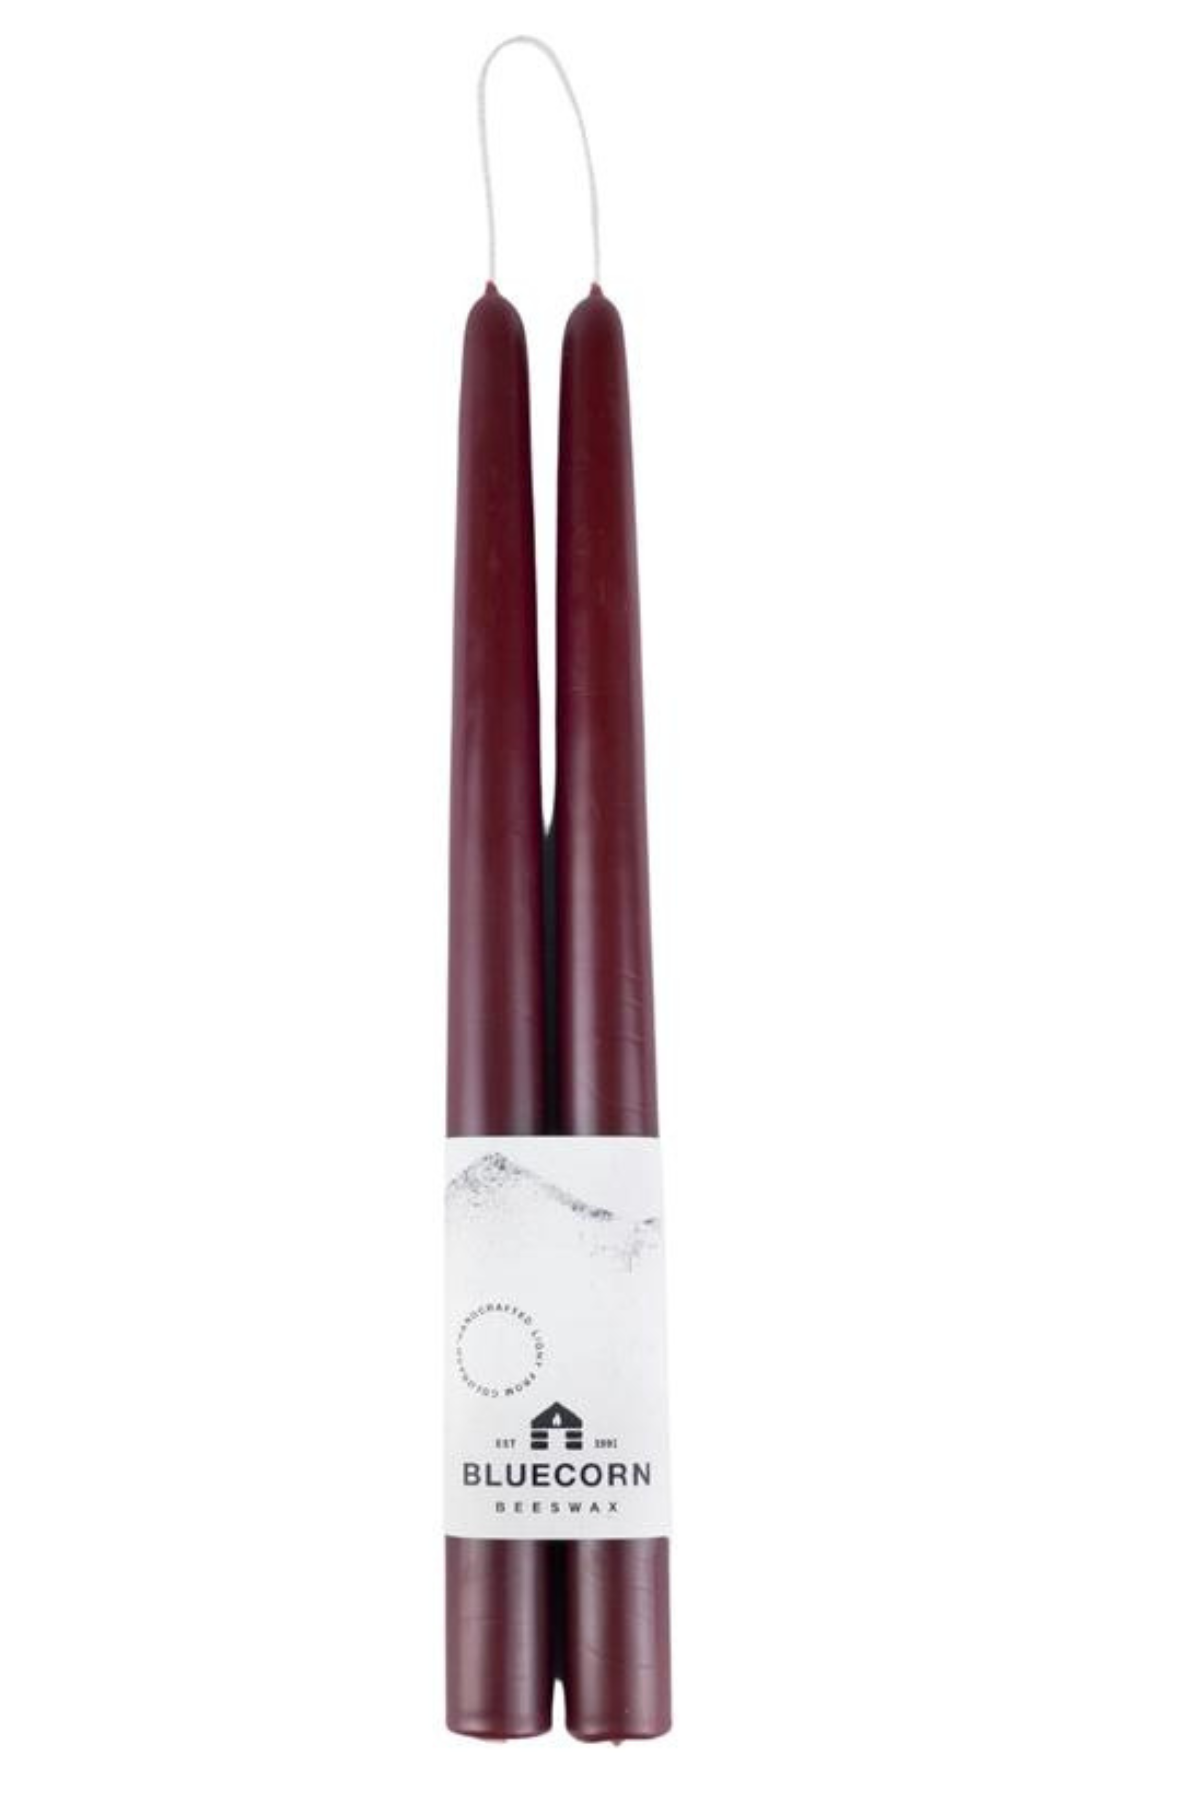 Bluecorn Candles Beeswax Taper Candle Pair